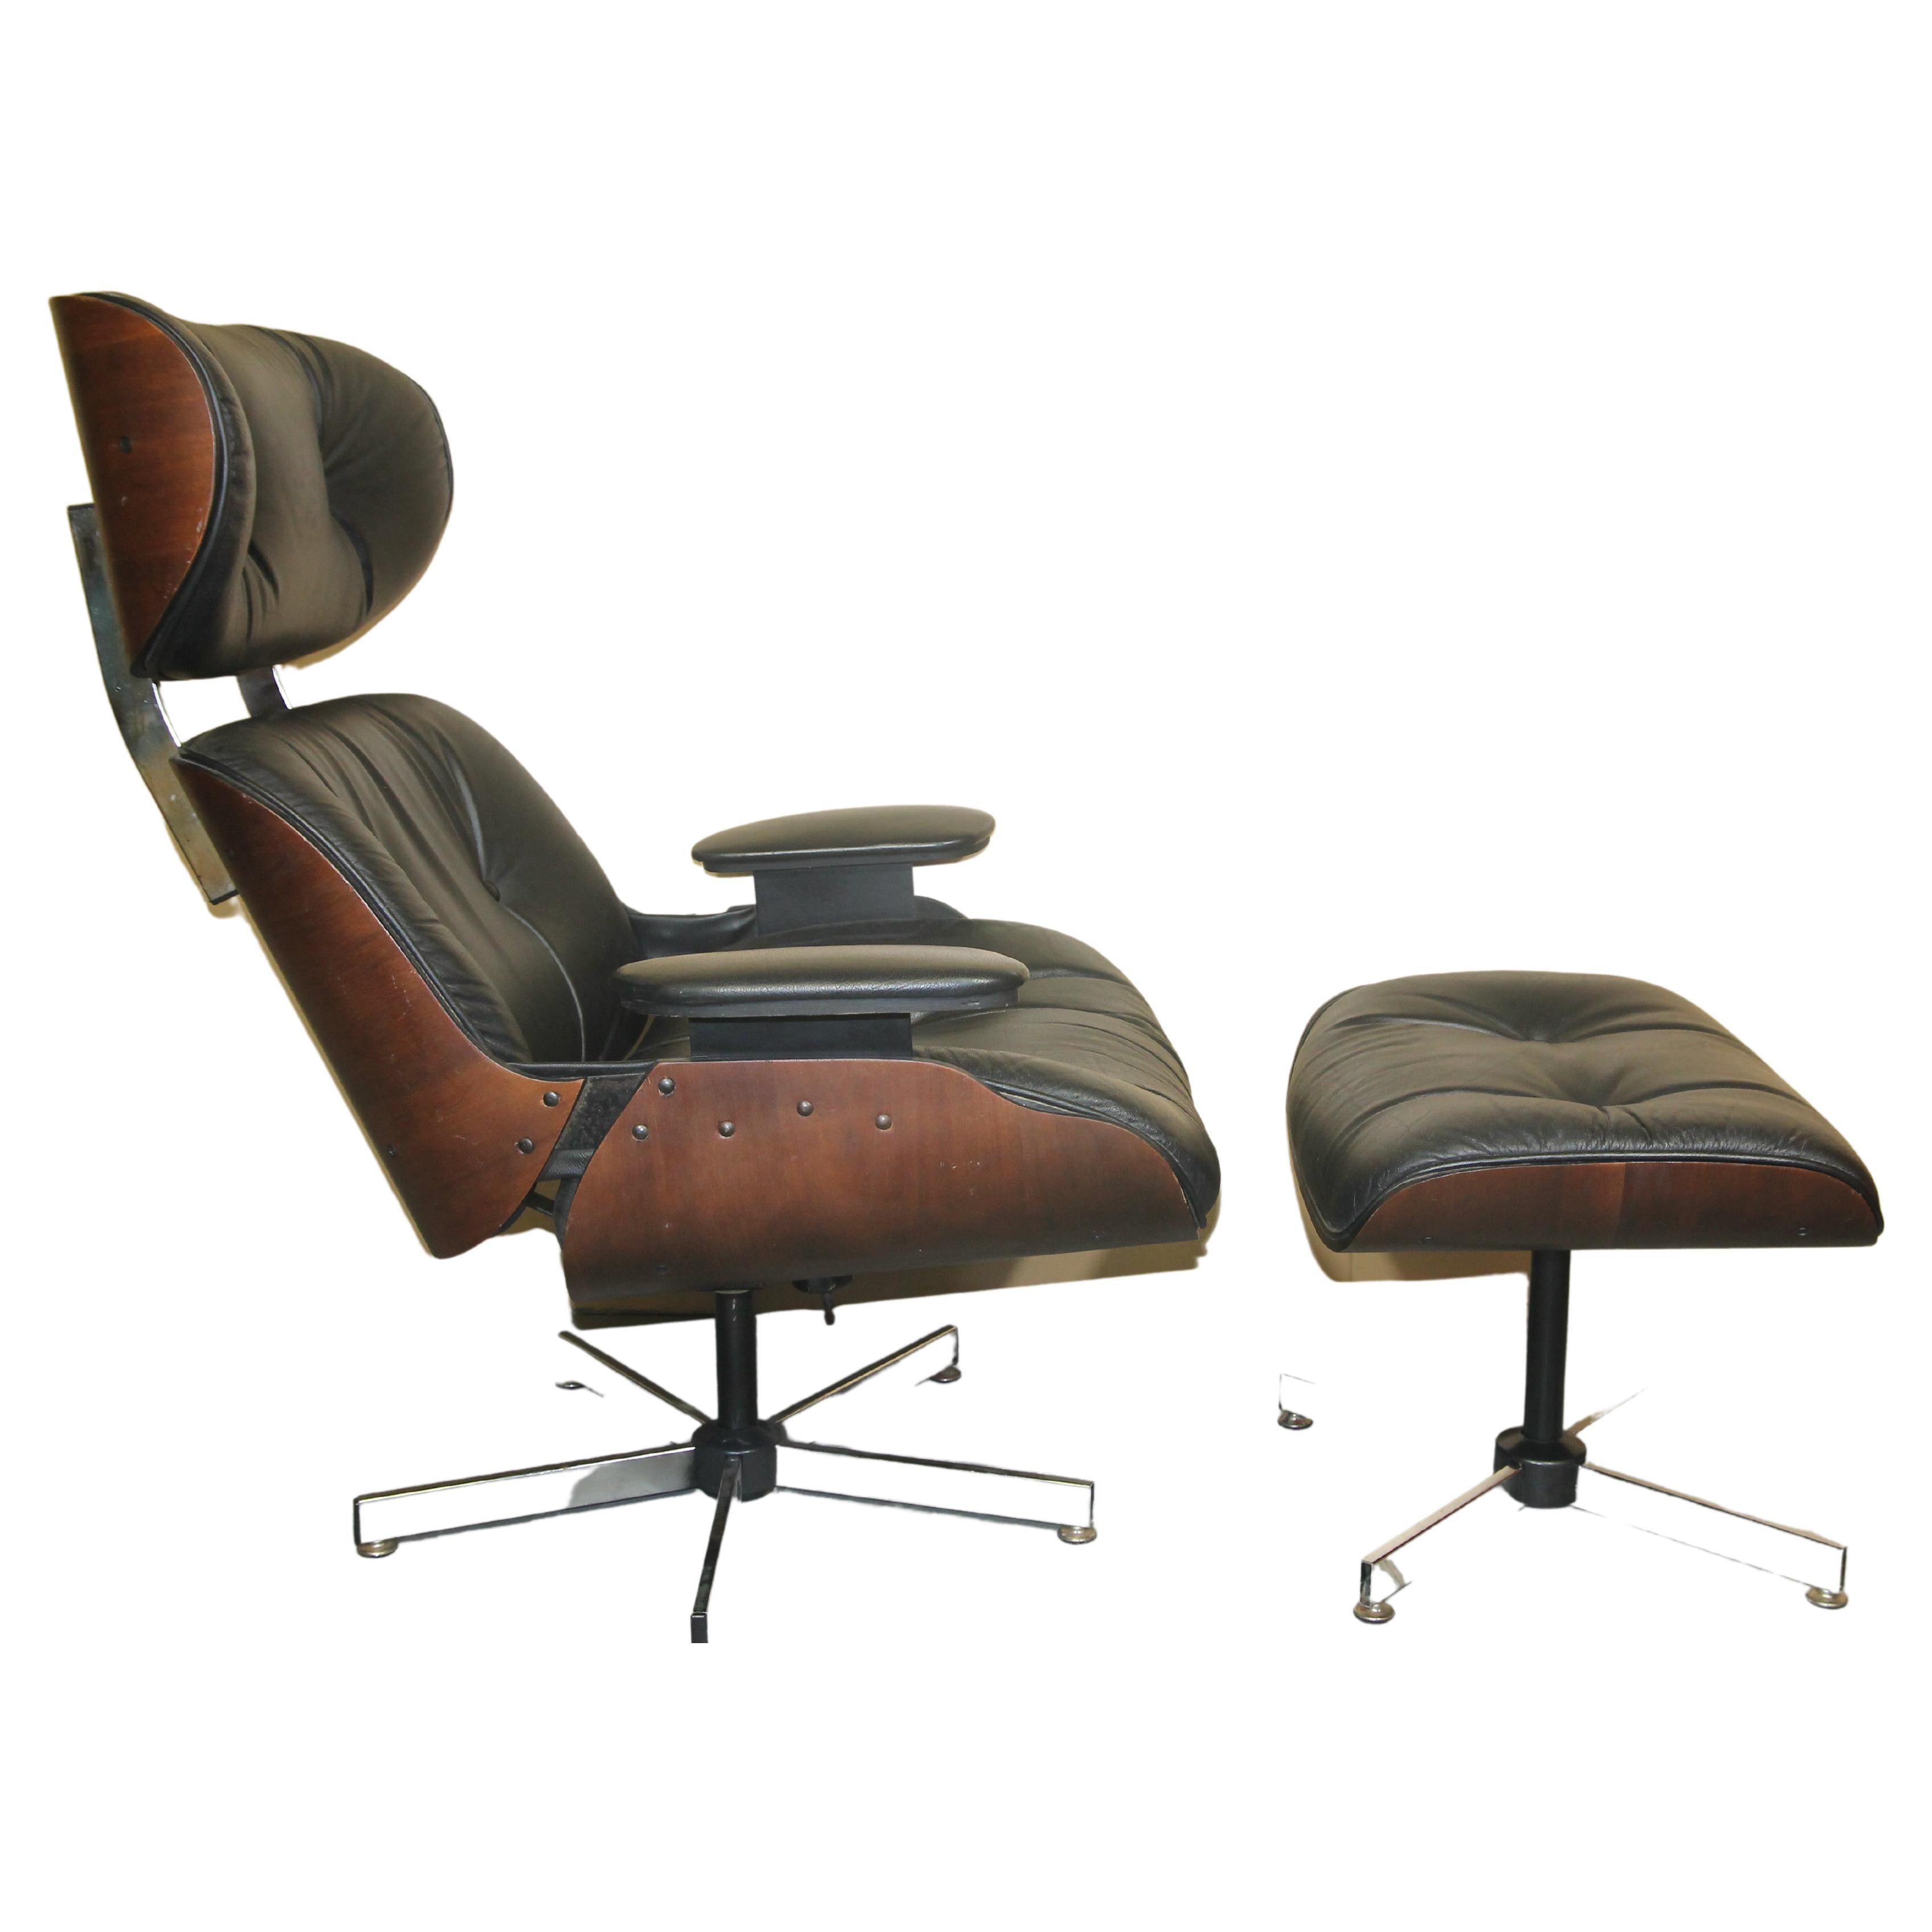 Plycraft Chair and Ottoman in the Style of the Eames 670 Lounge Chair